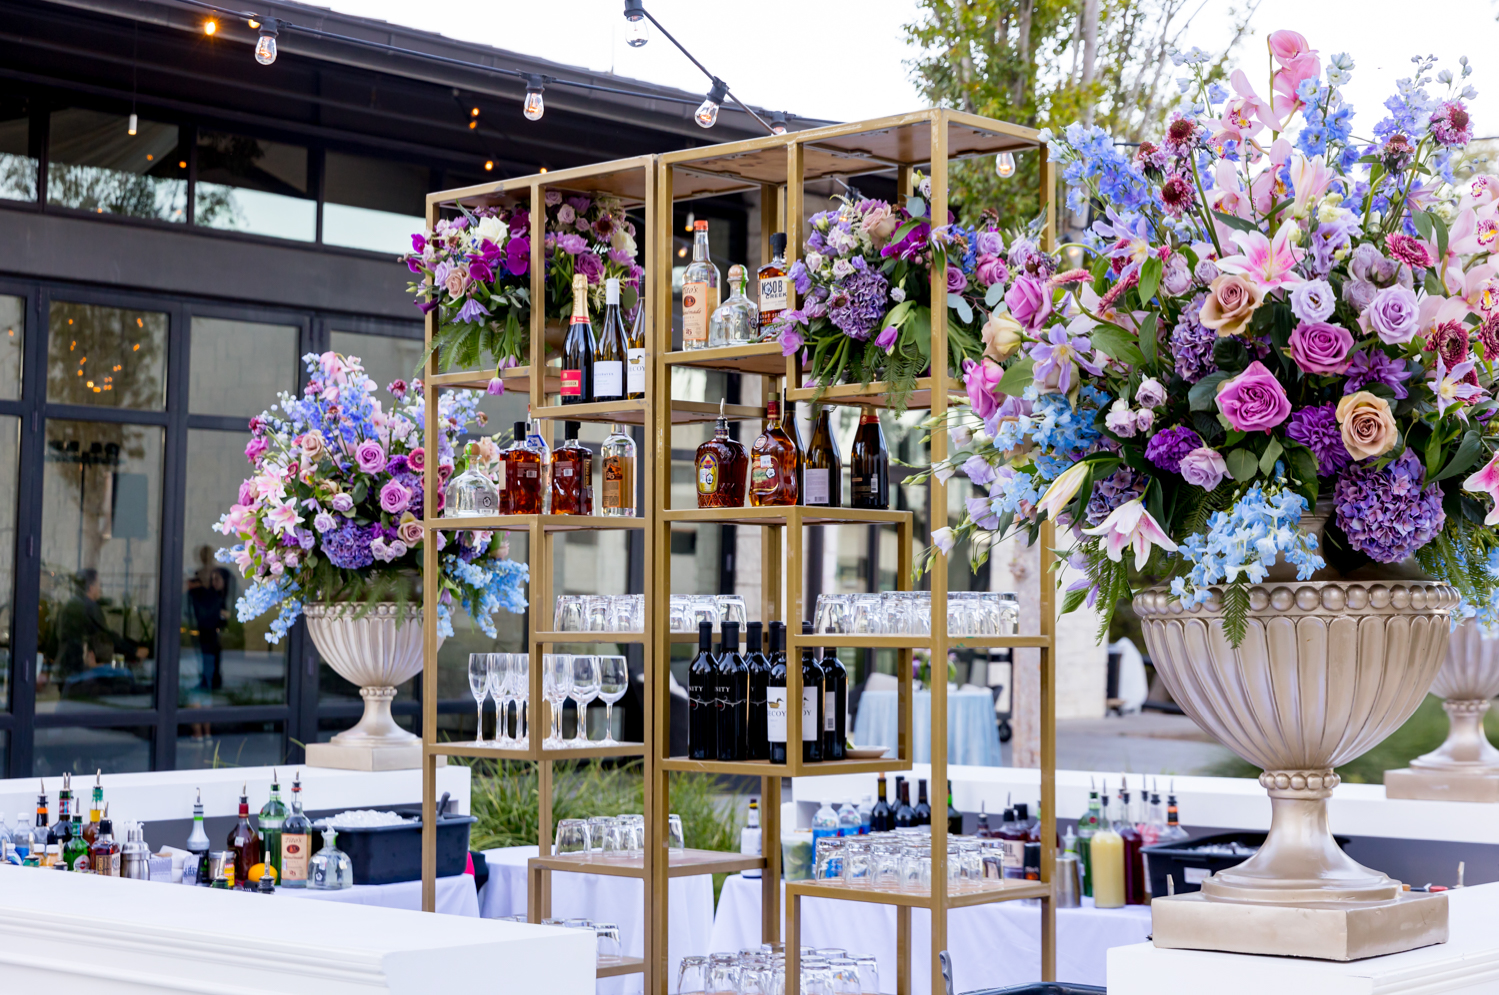 A close-up shot of the outdoor bar and large blue, purple, and pink flower arrangements